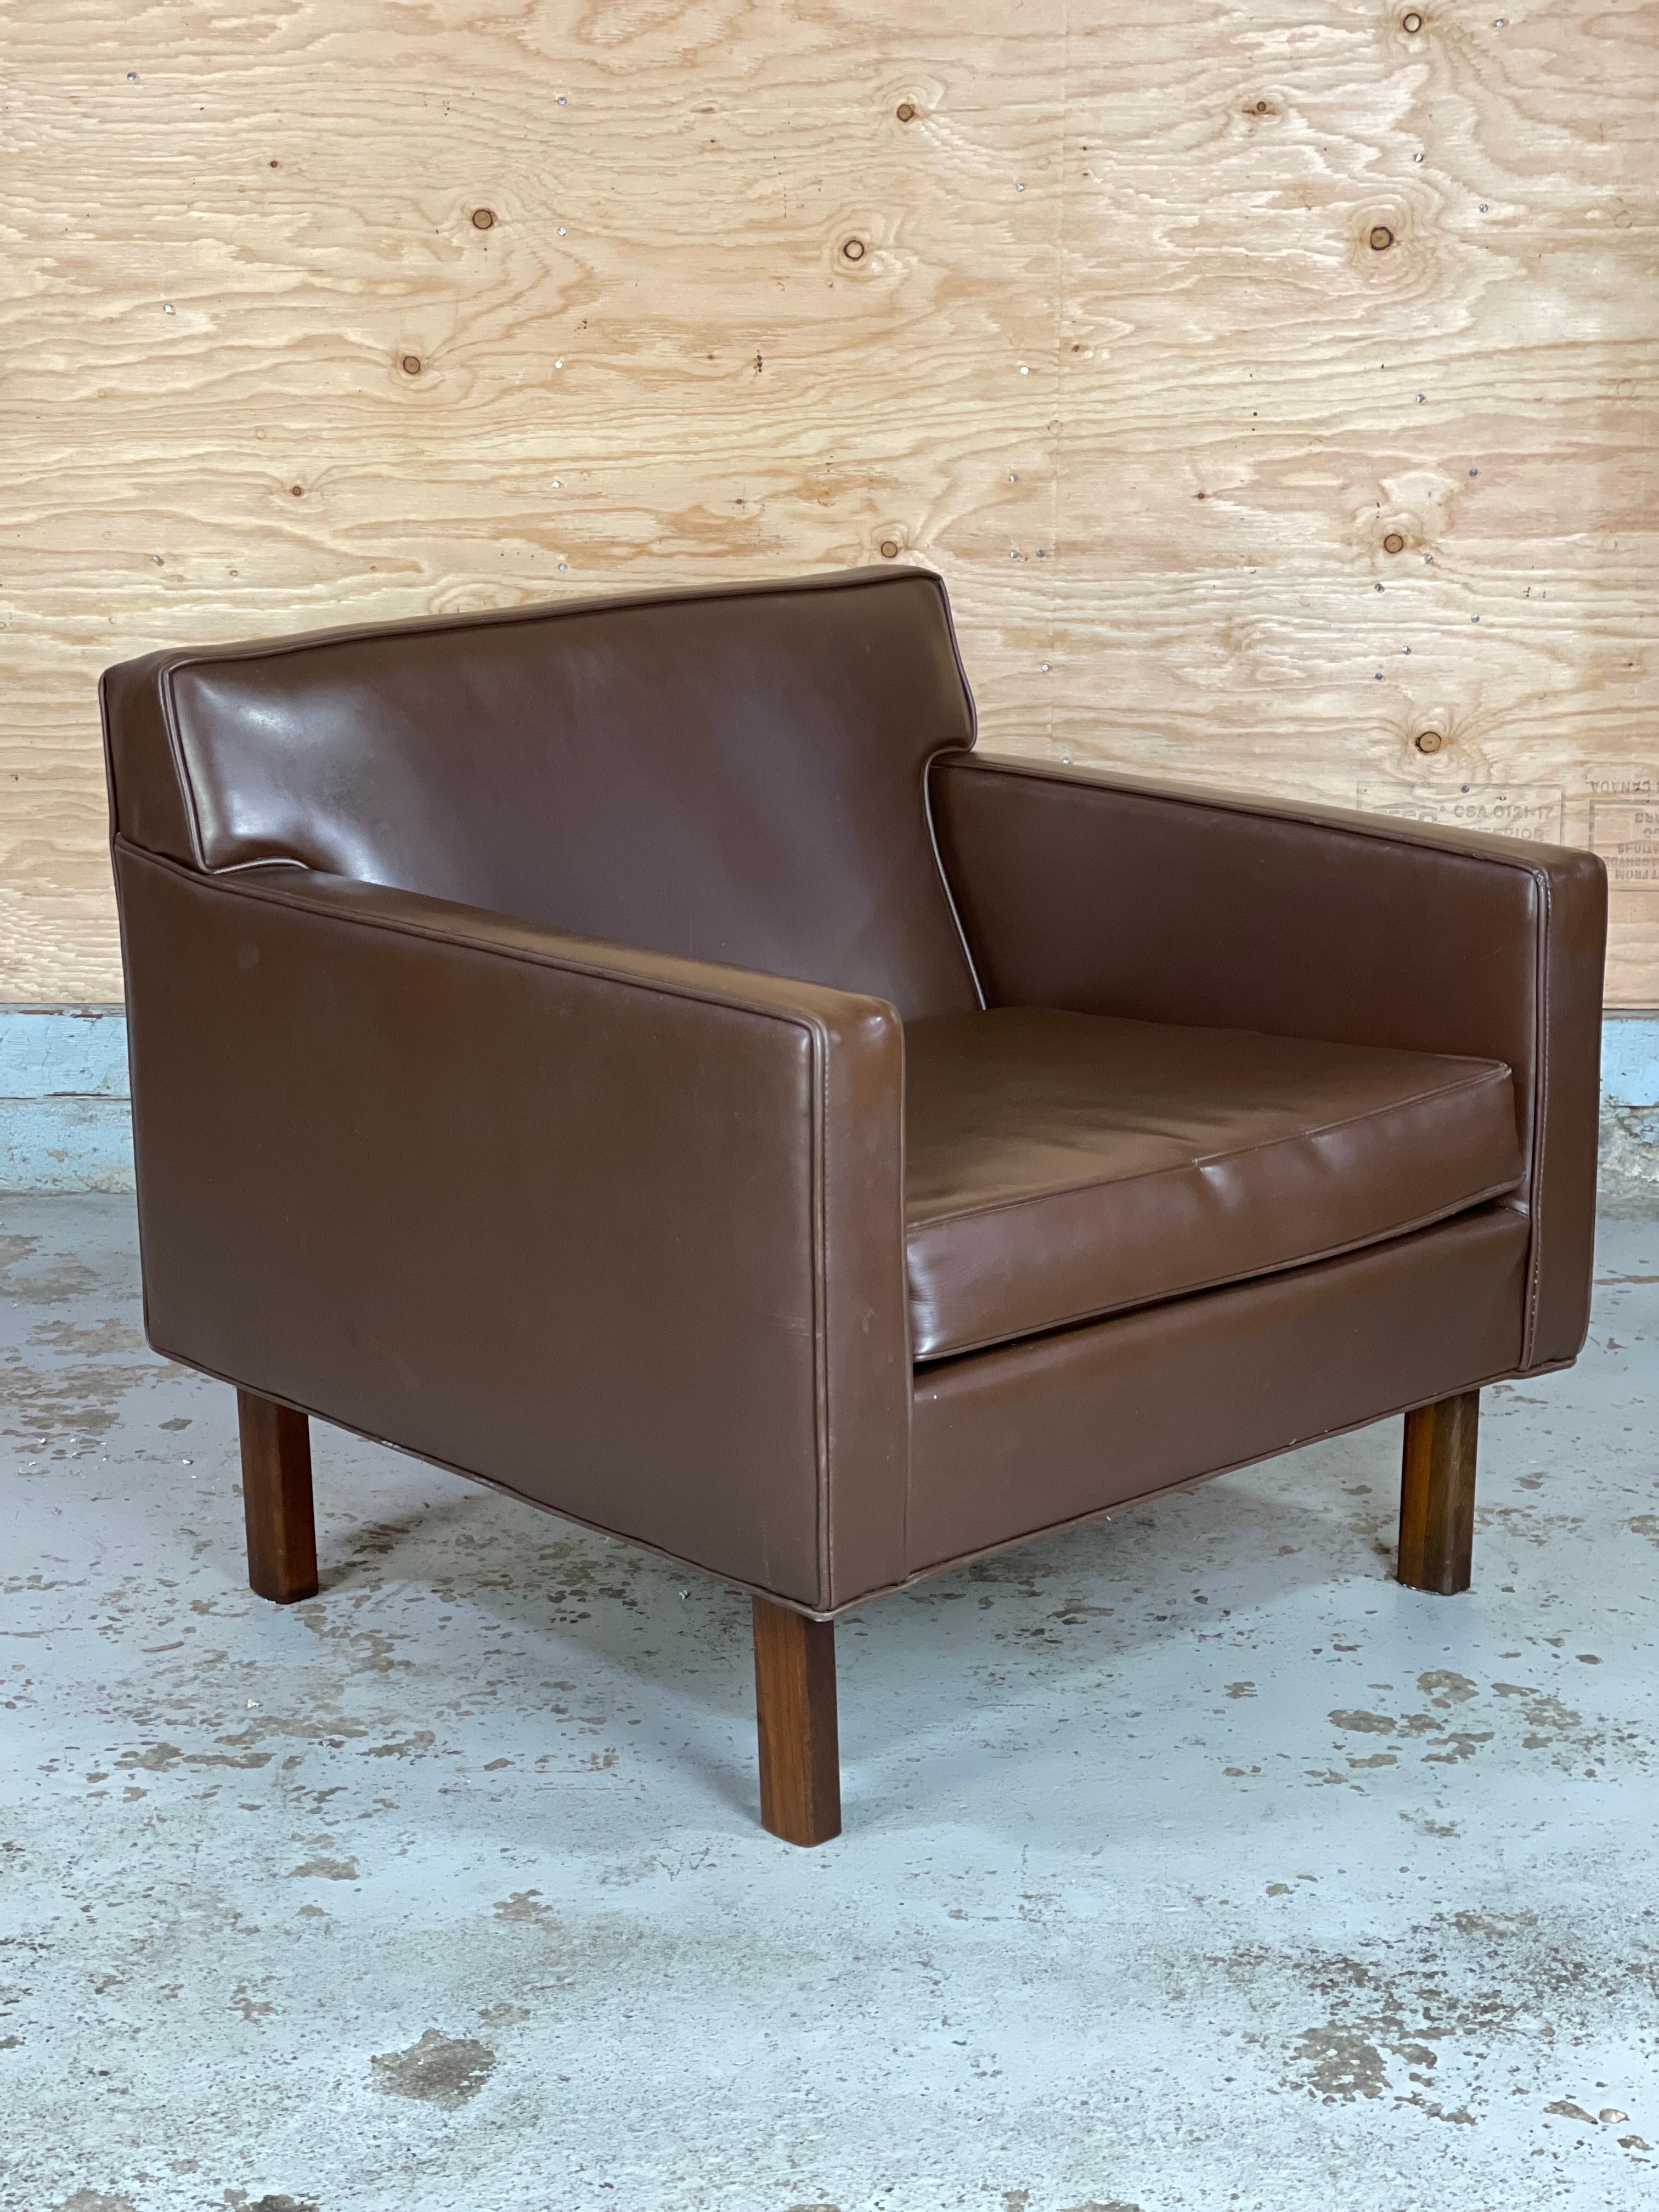 Nice low-profile Jens Risom style lounge chair. Original Naugahyde has wear. Please see pictures.
*Please message for a lower cost shipping quote with your zip code. 